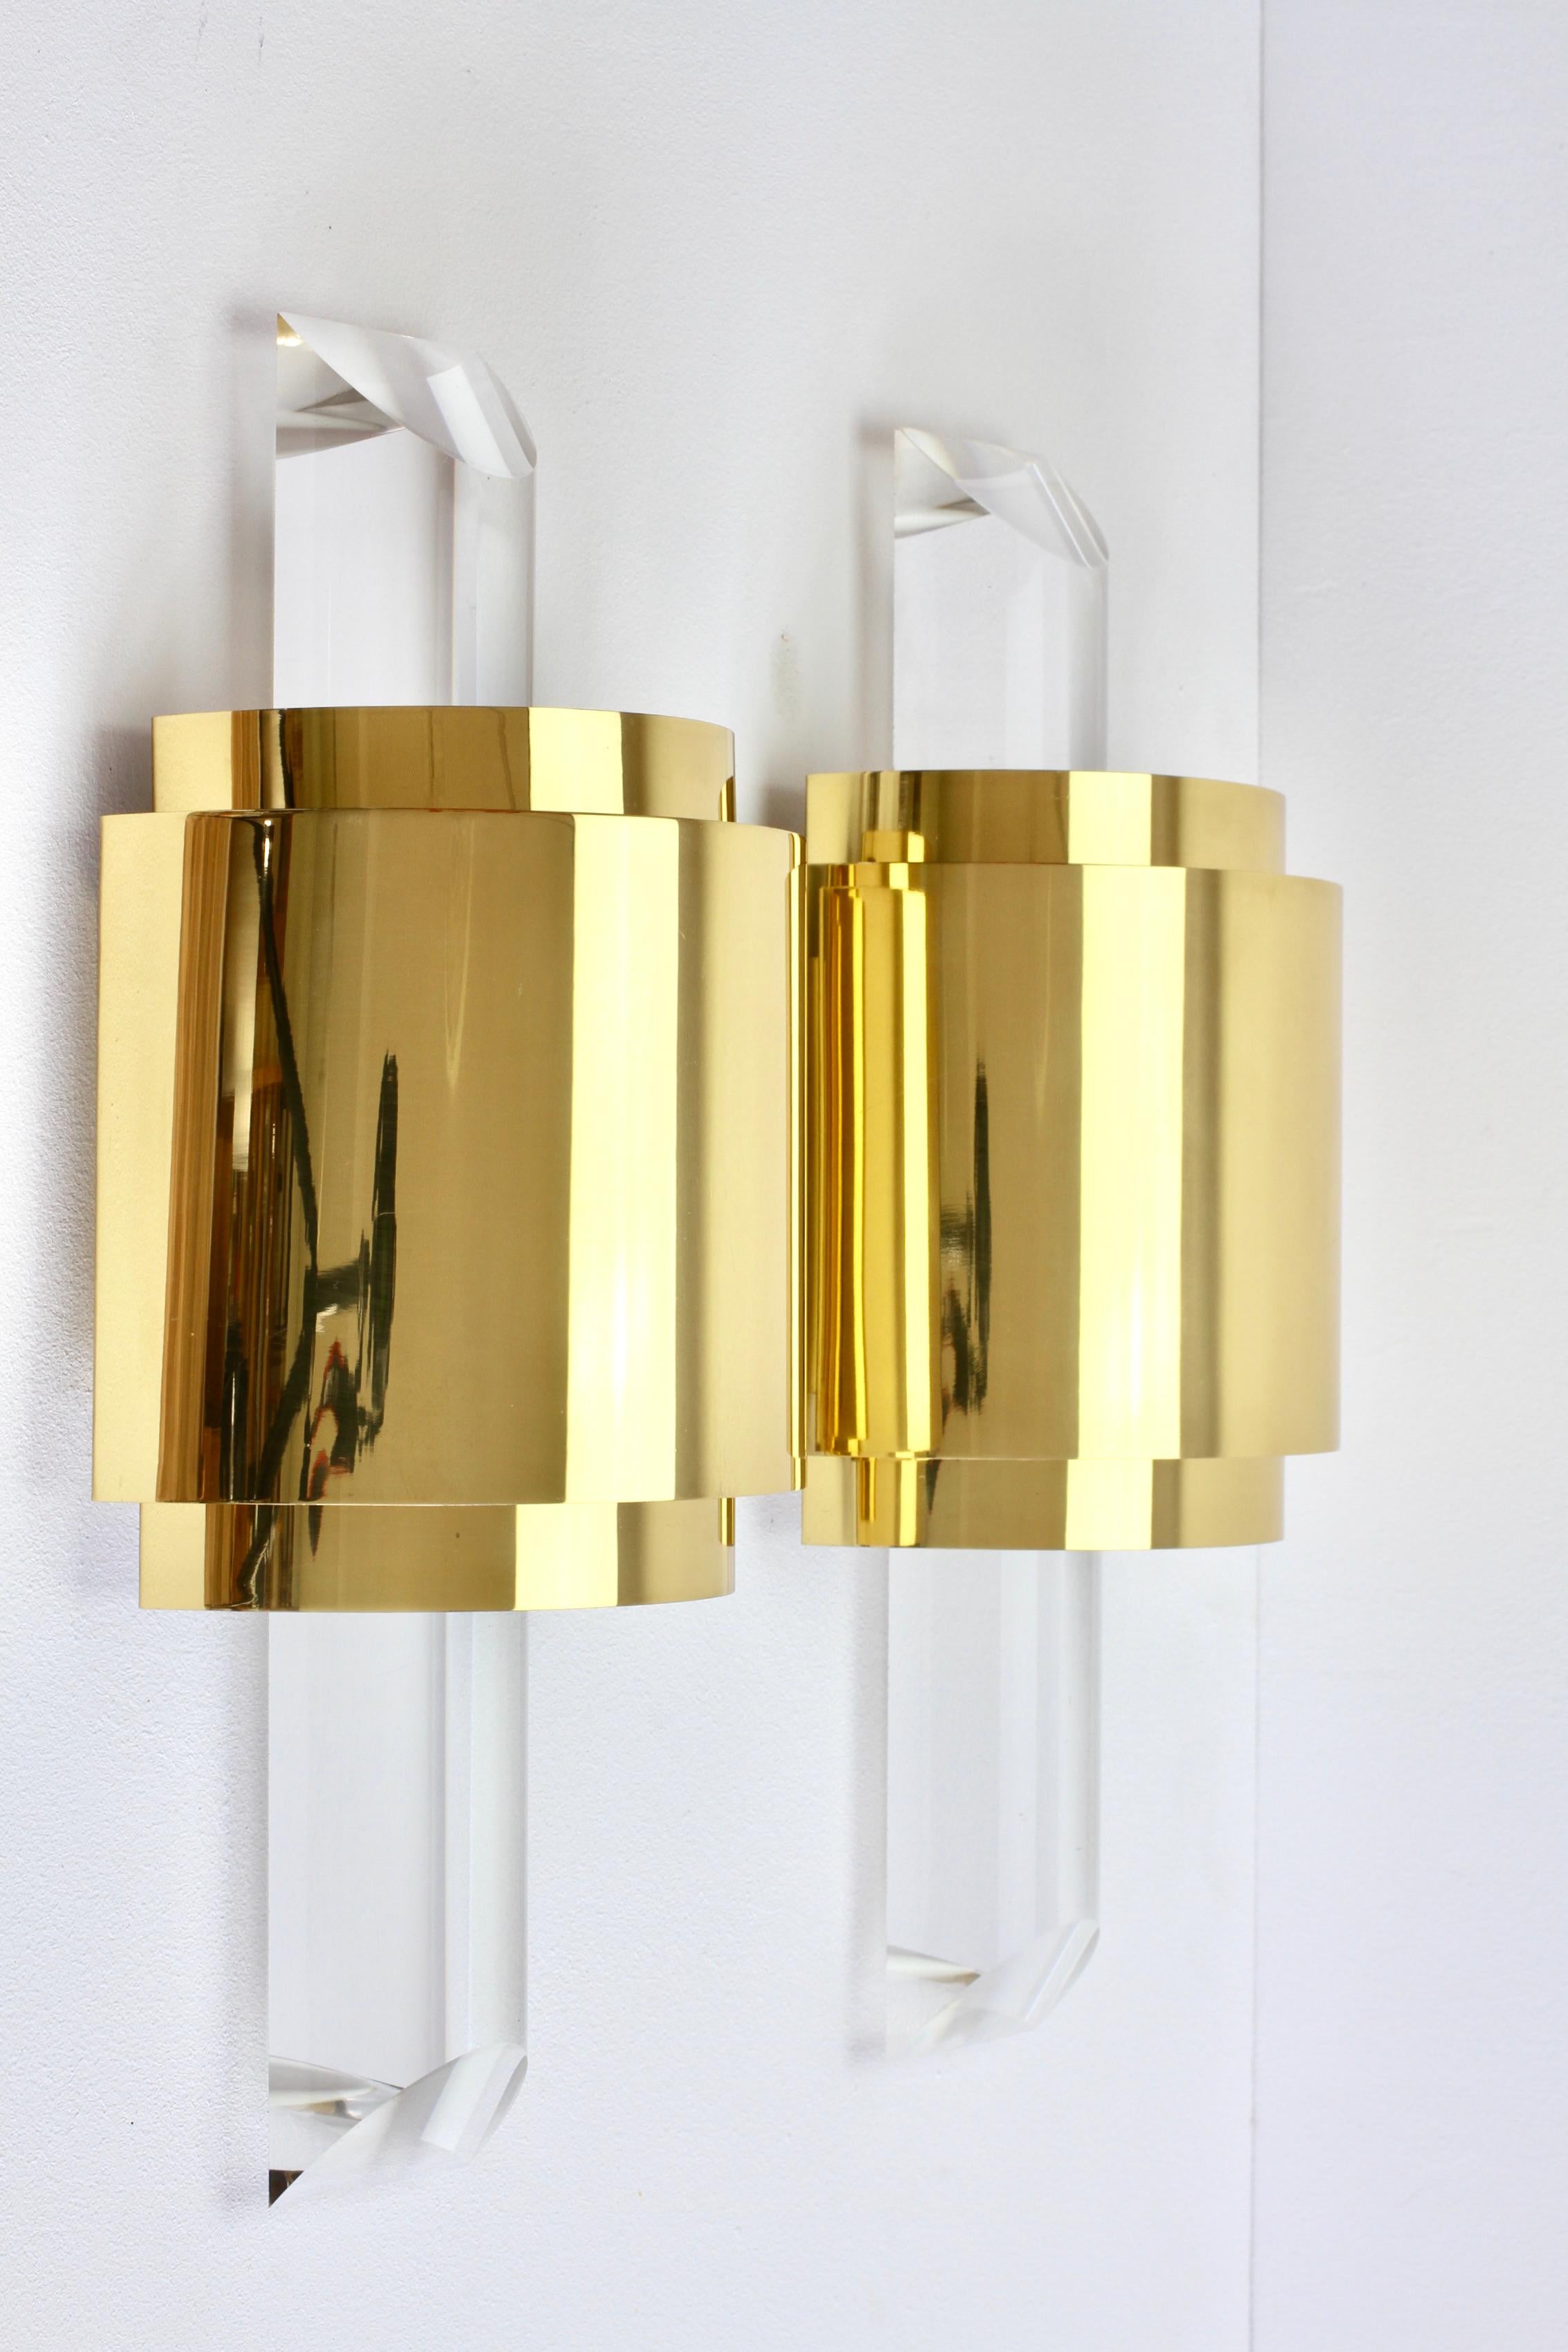 Large Hollywood Regency Lucite and Brass Wall Lights or Sconces, circa 1970s For Sale 5